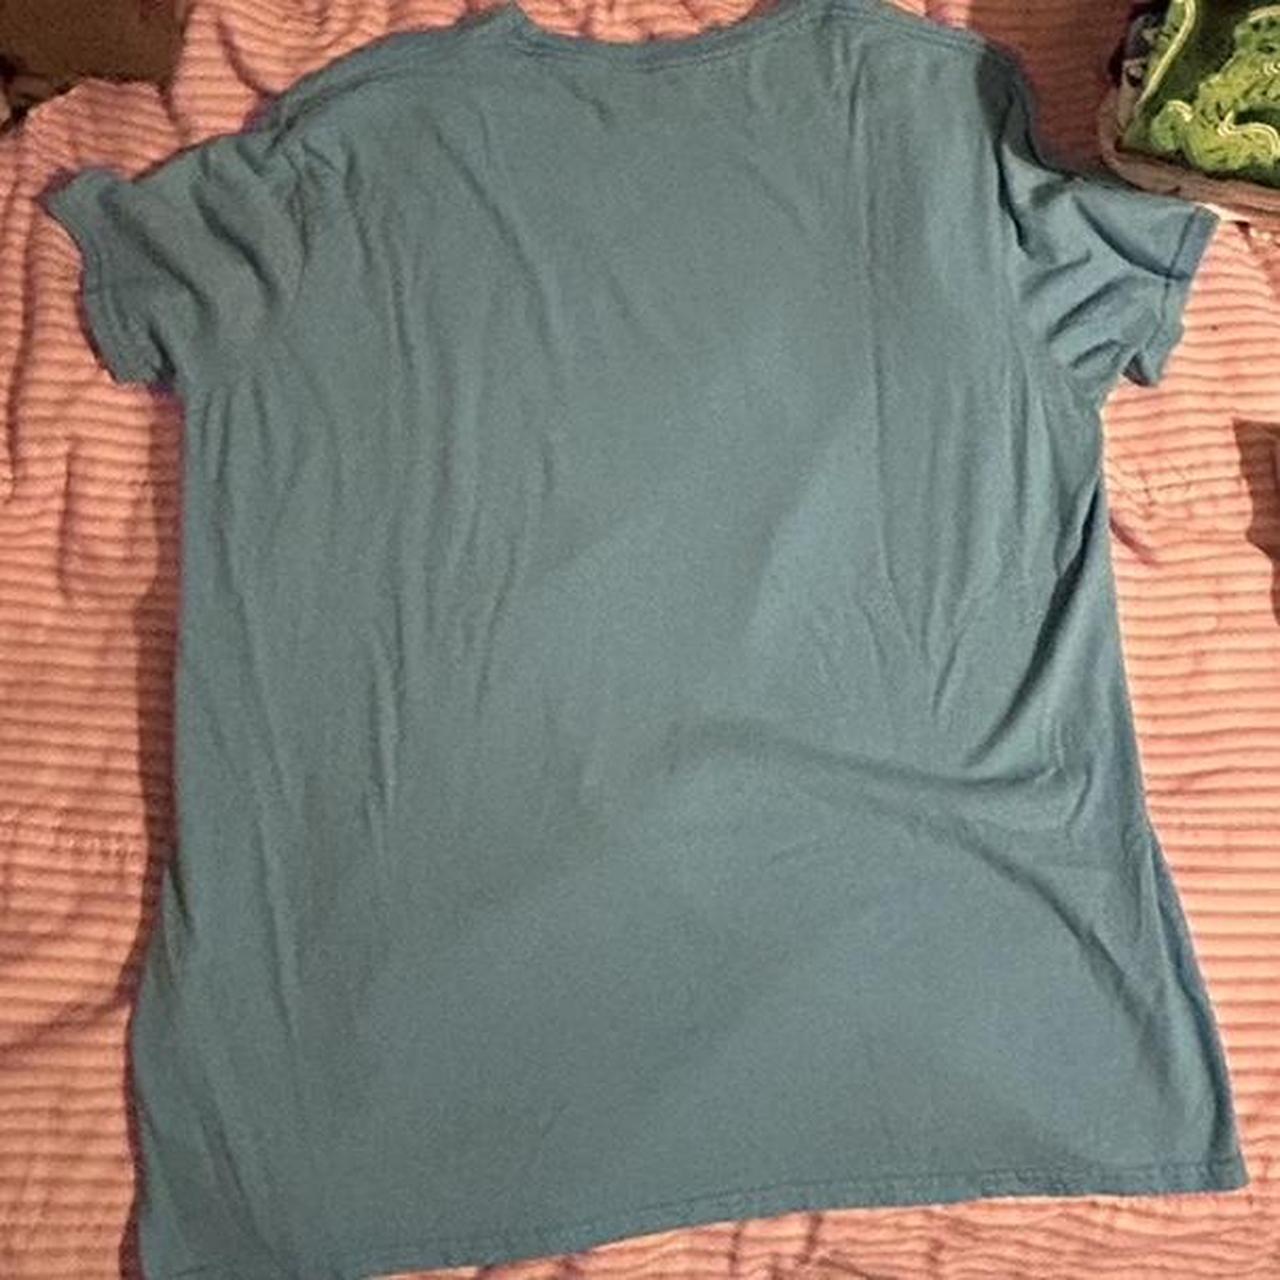 FREE SHIPPING. Tom & Jerry t-shirt from kohls.... - Depop